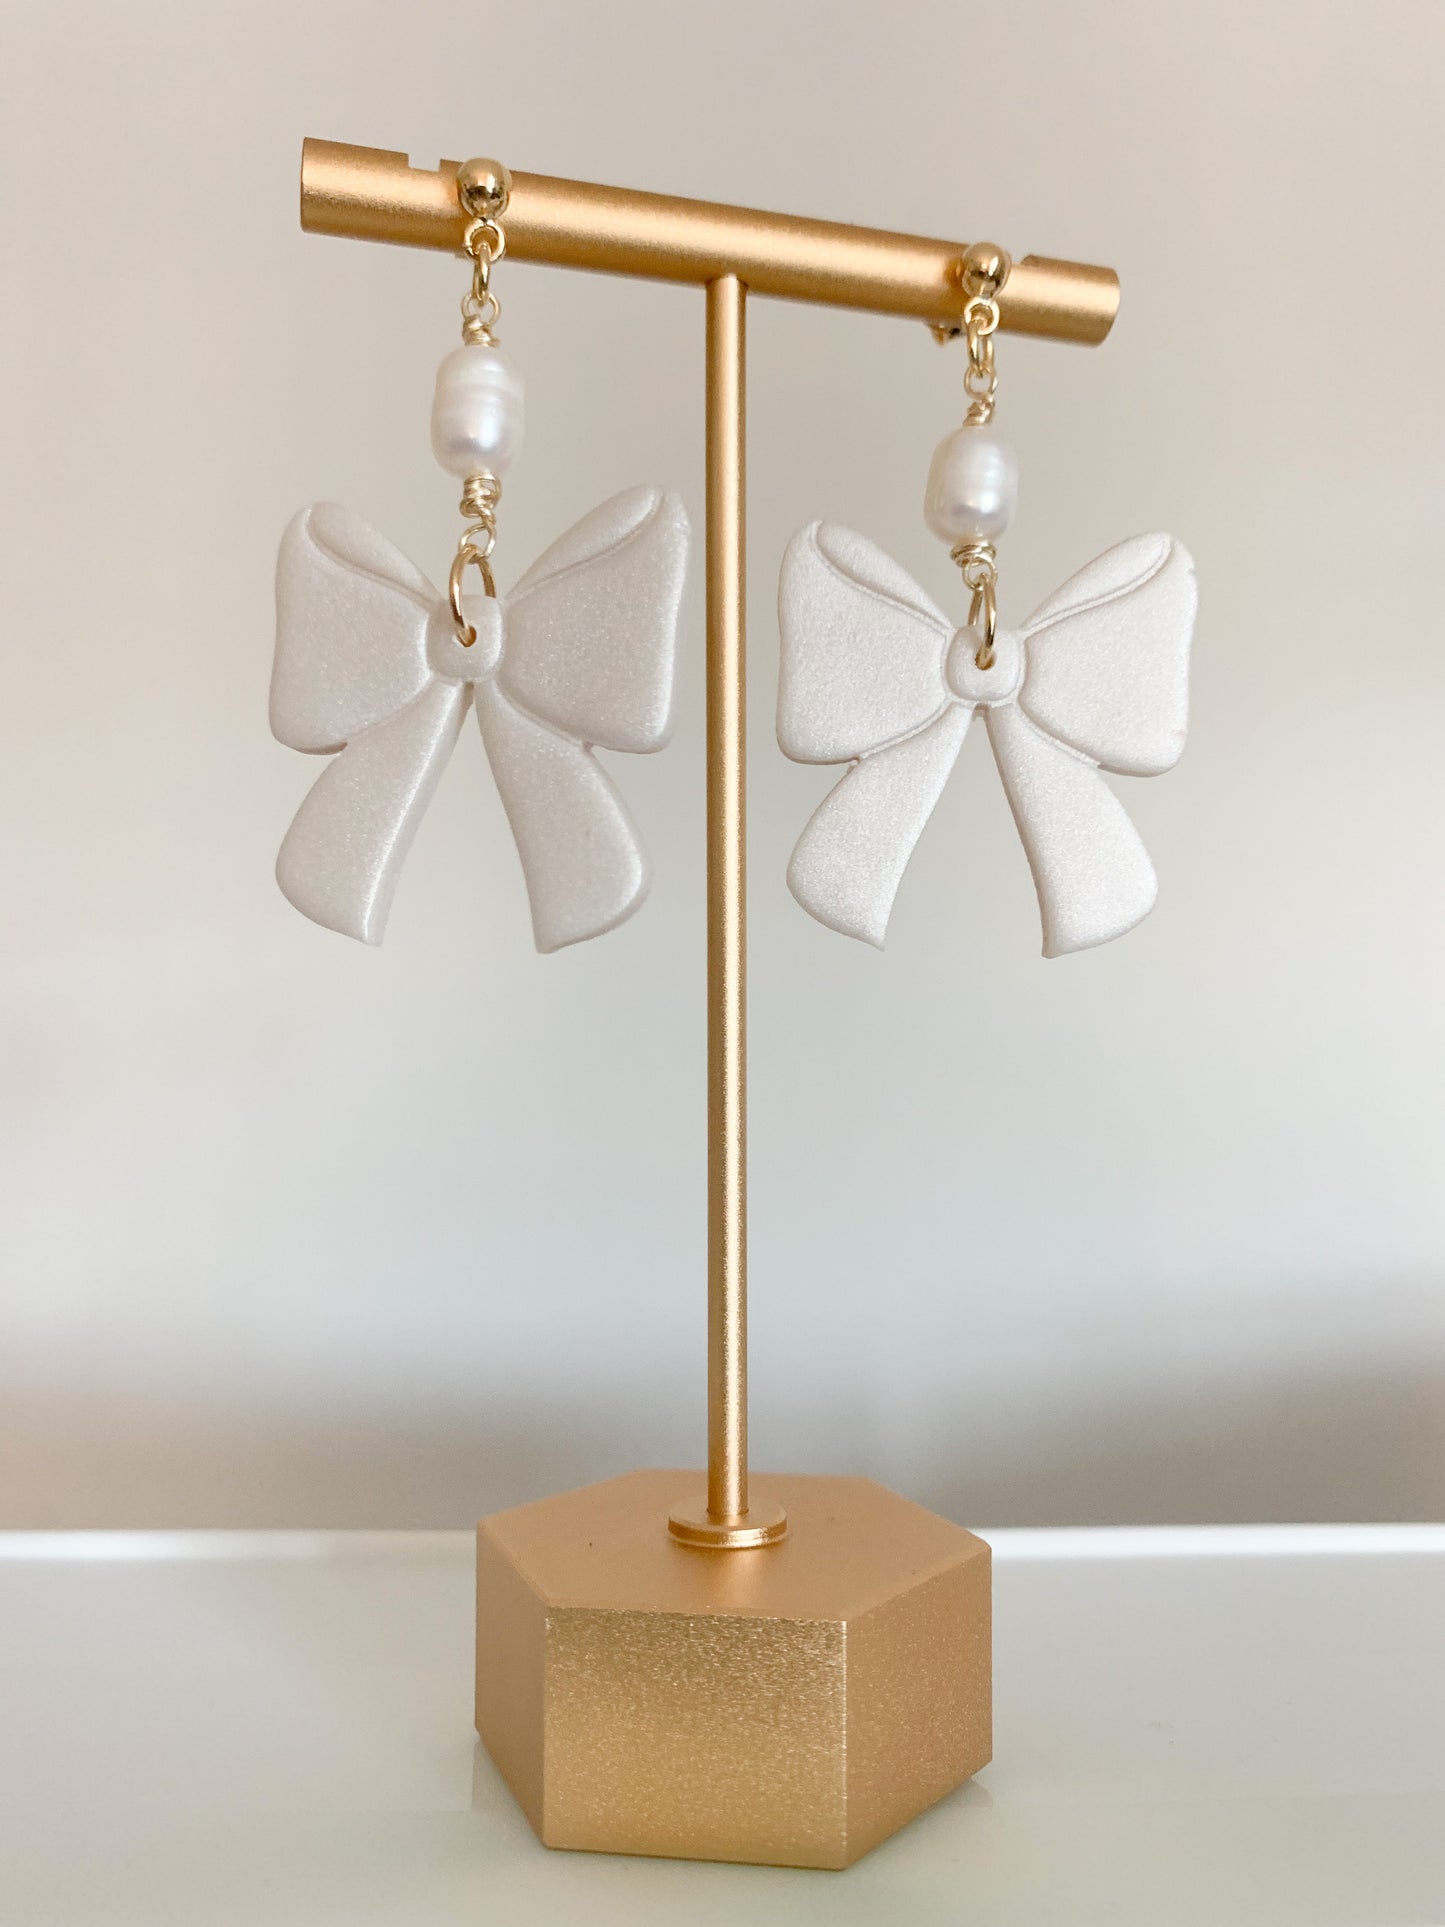 A pair of handcrafted polymer clay earrings featuring 18K gold plated earring posts and a mini pearl